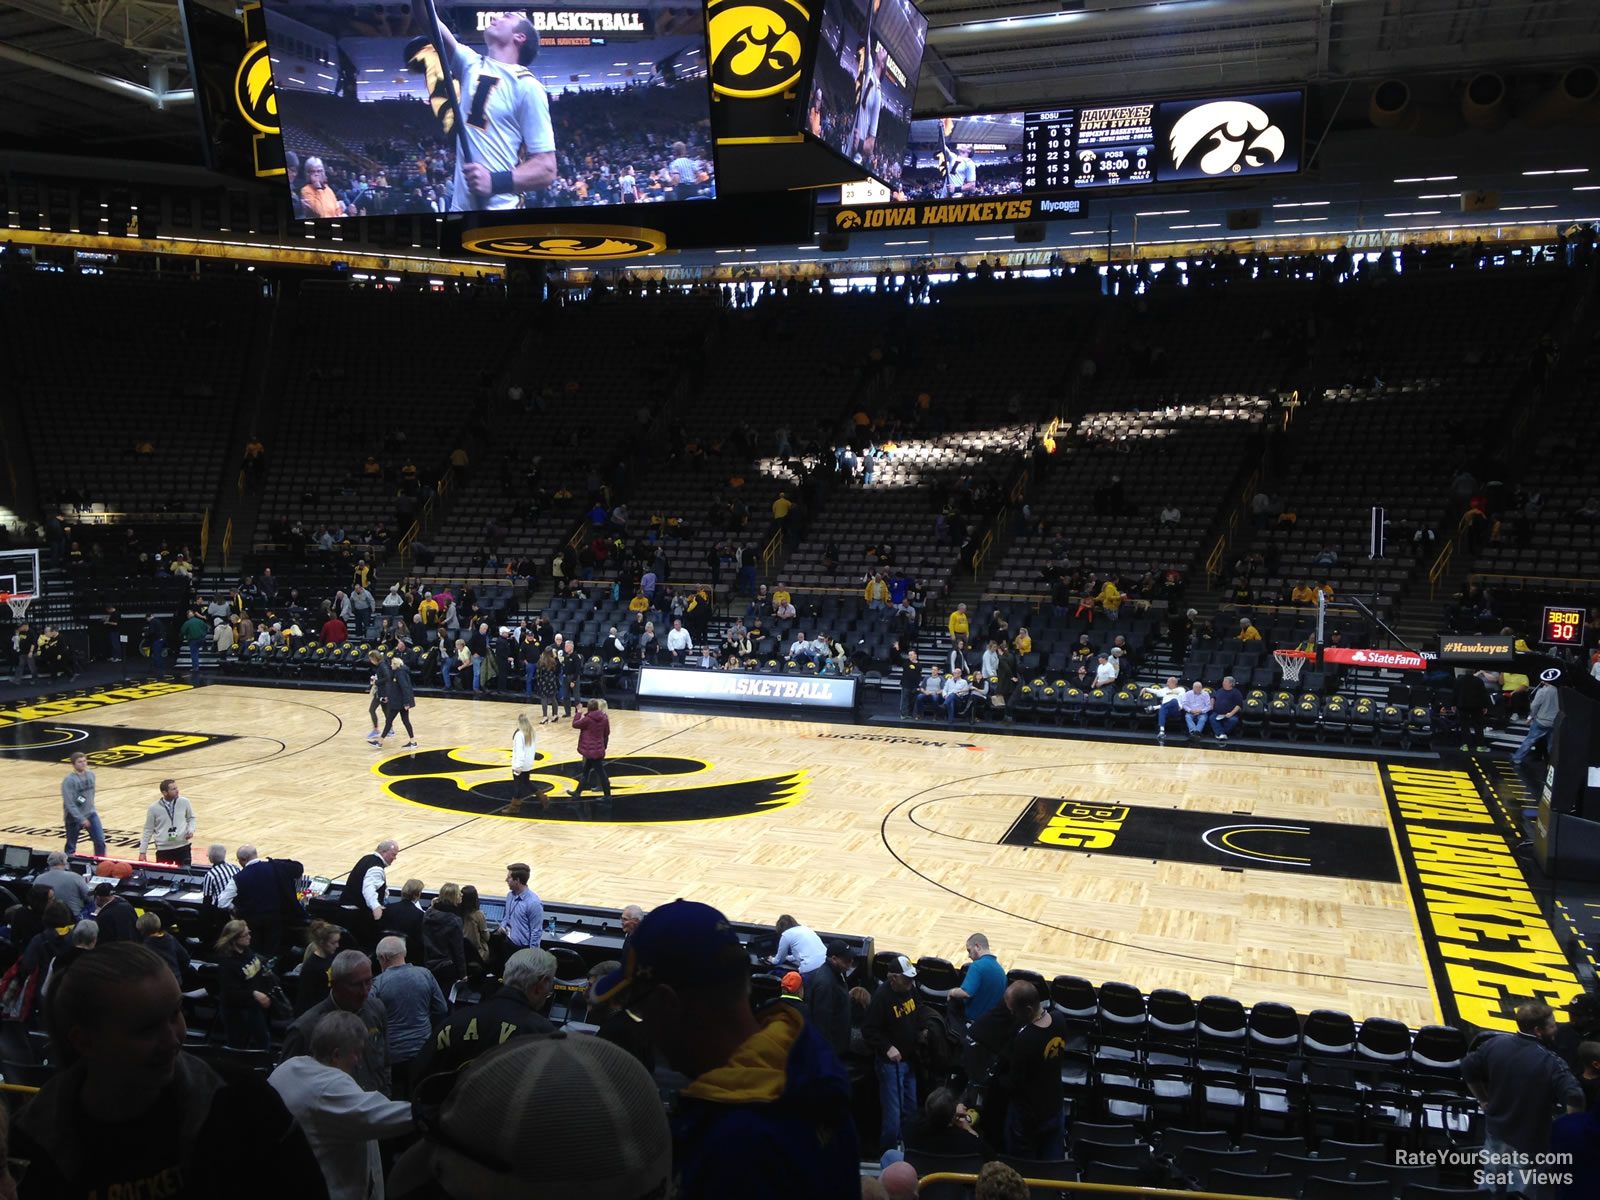 section c, row 15 seat view  - carver-hawkeye arena